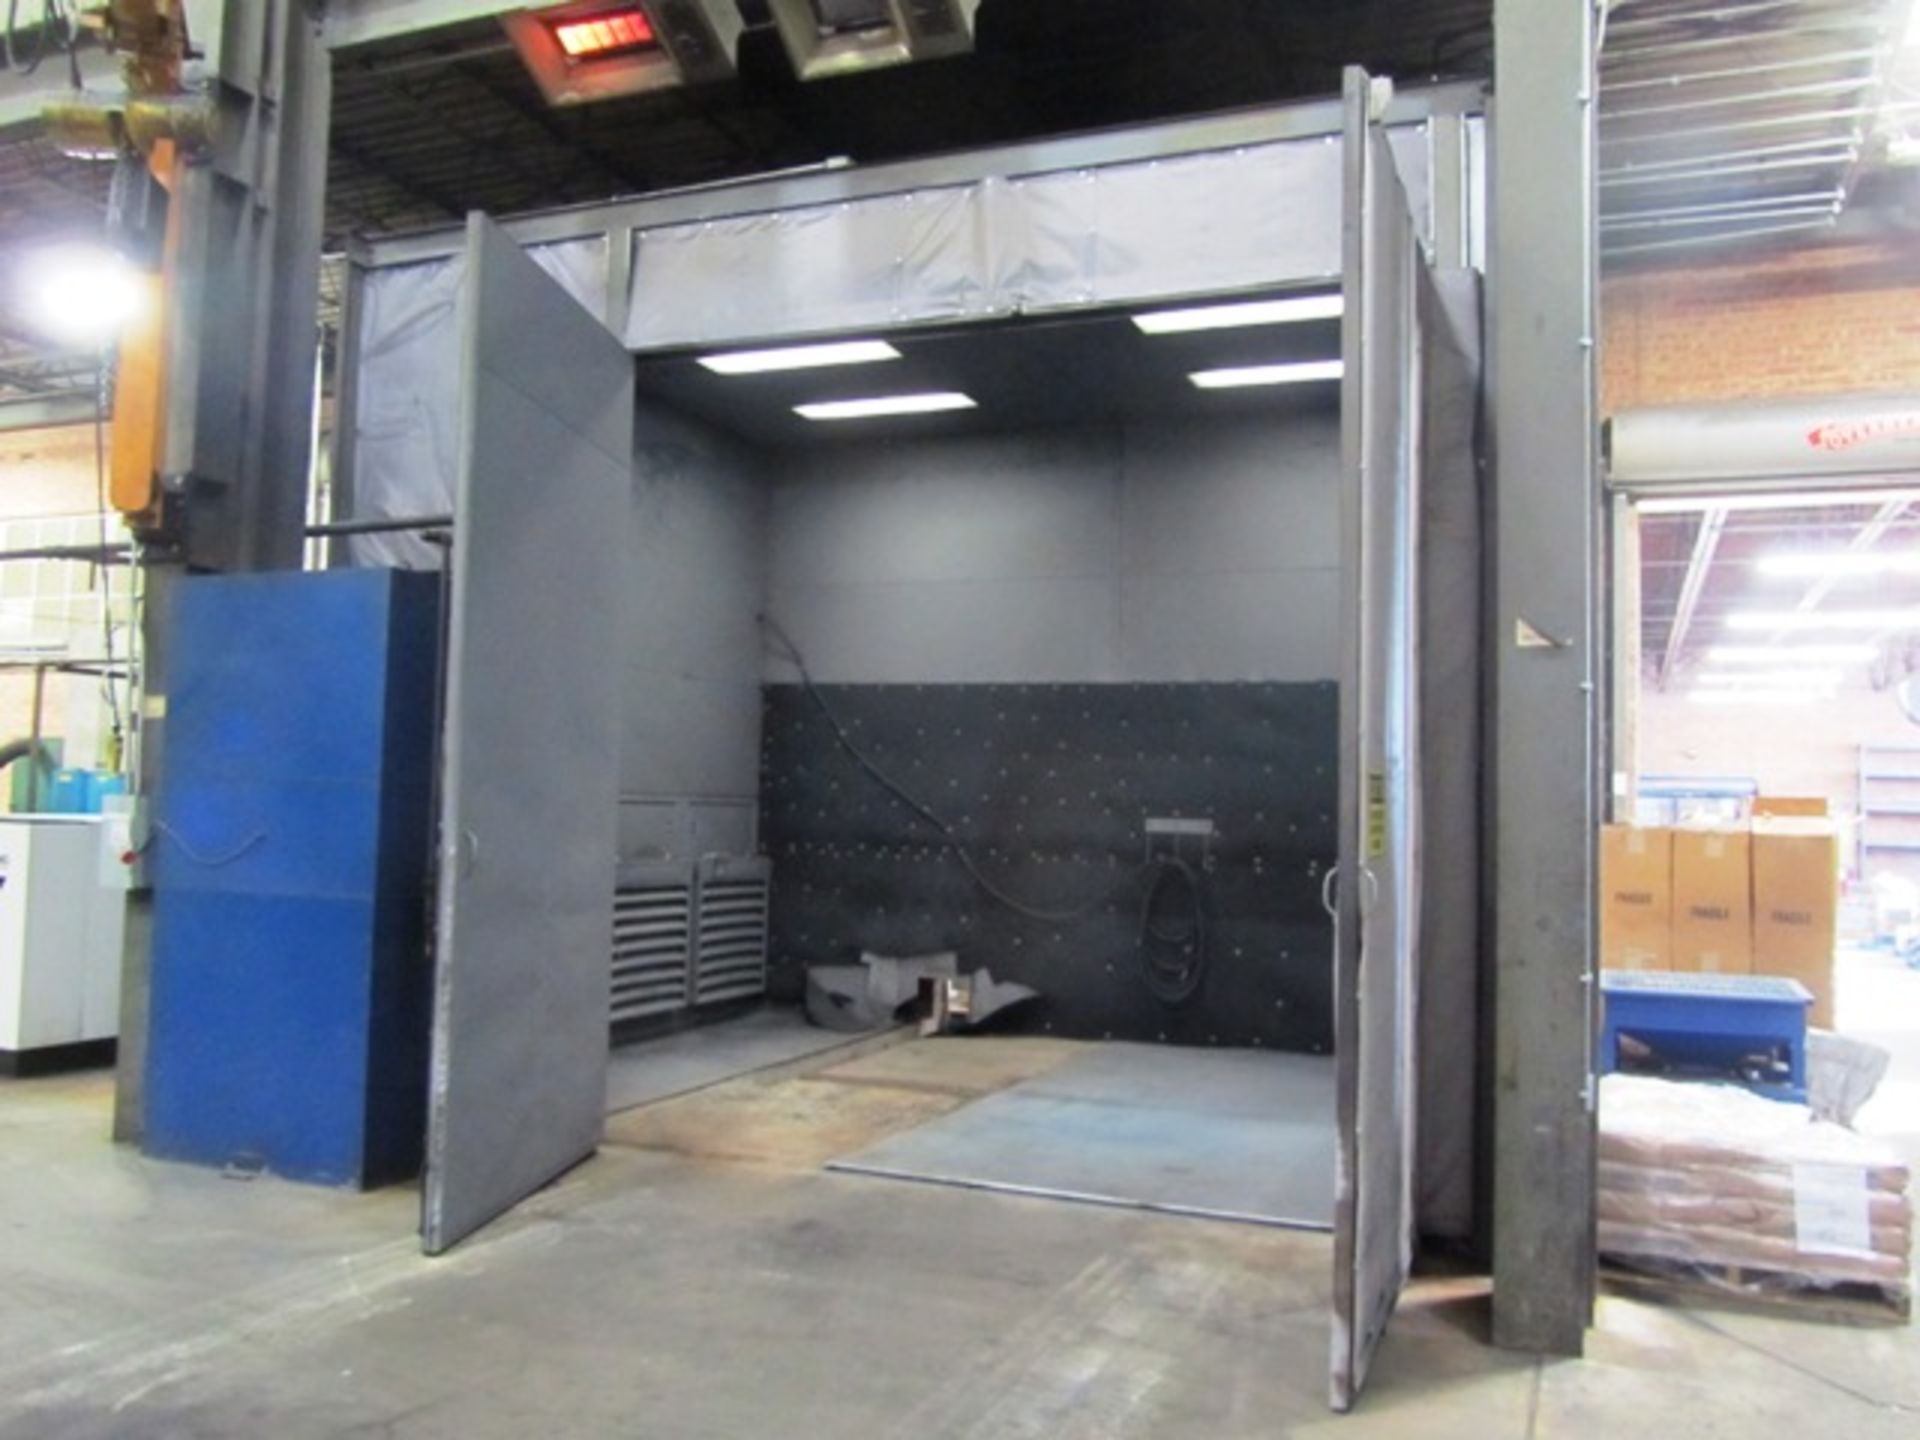 JBI 18'W x 14'D x 12'H Blast Booth with Exhaust, Lights, Start & Stop Push Button Control - Image 3 of 3